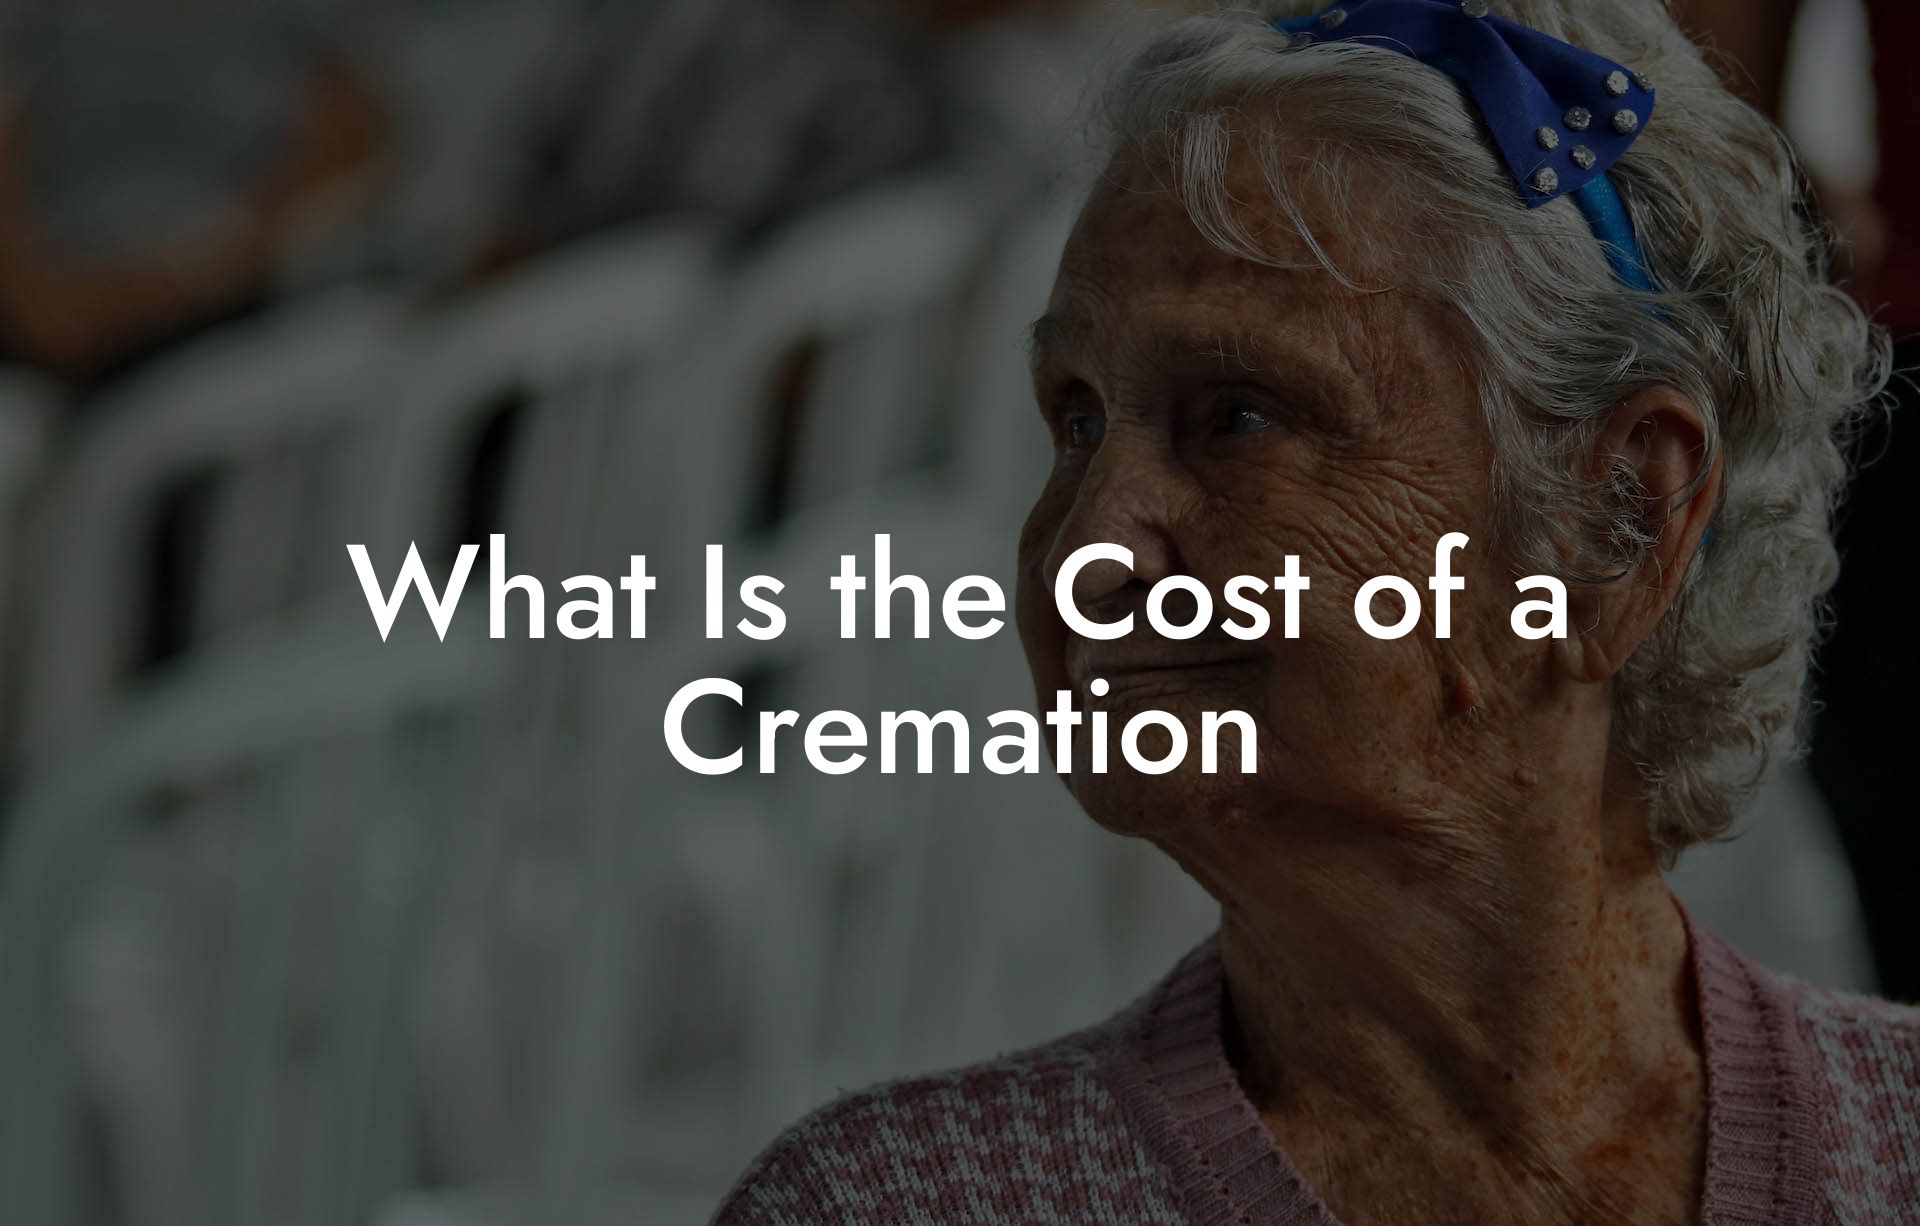 What Is the Cost of a Cremation